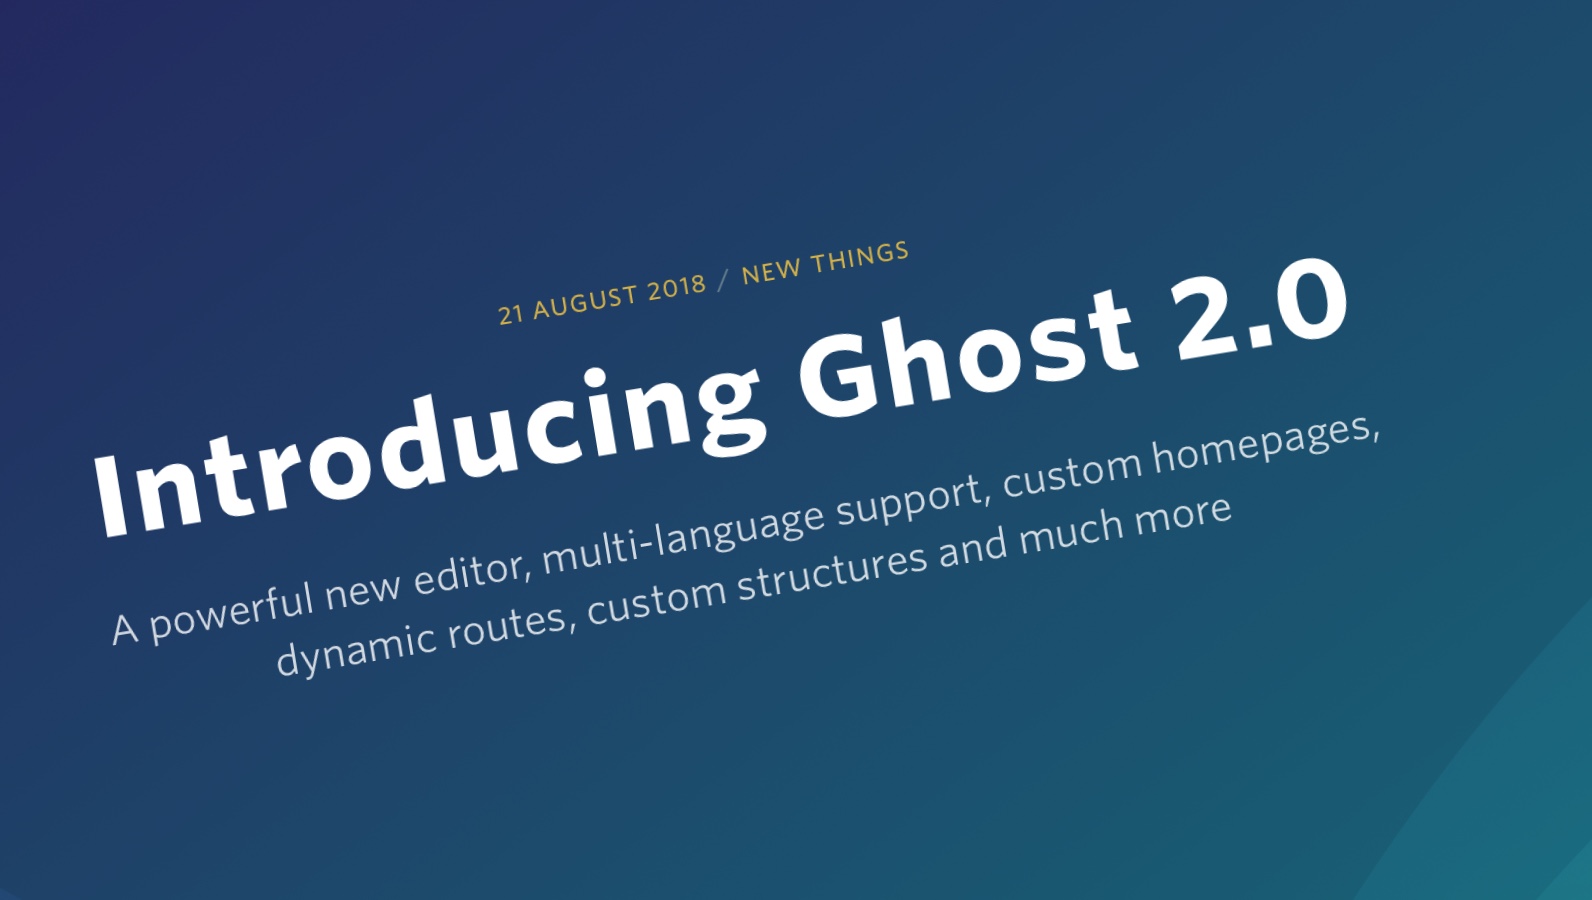 One Man & His Blog is now running on Ghost 2.0